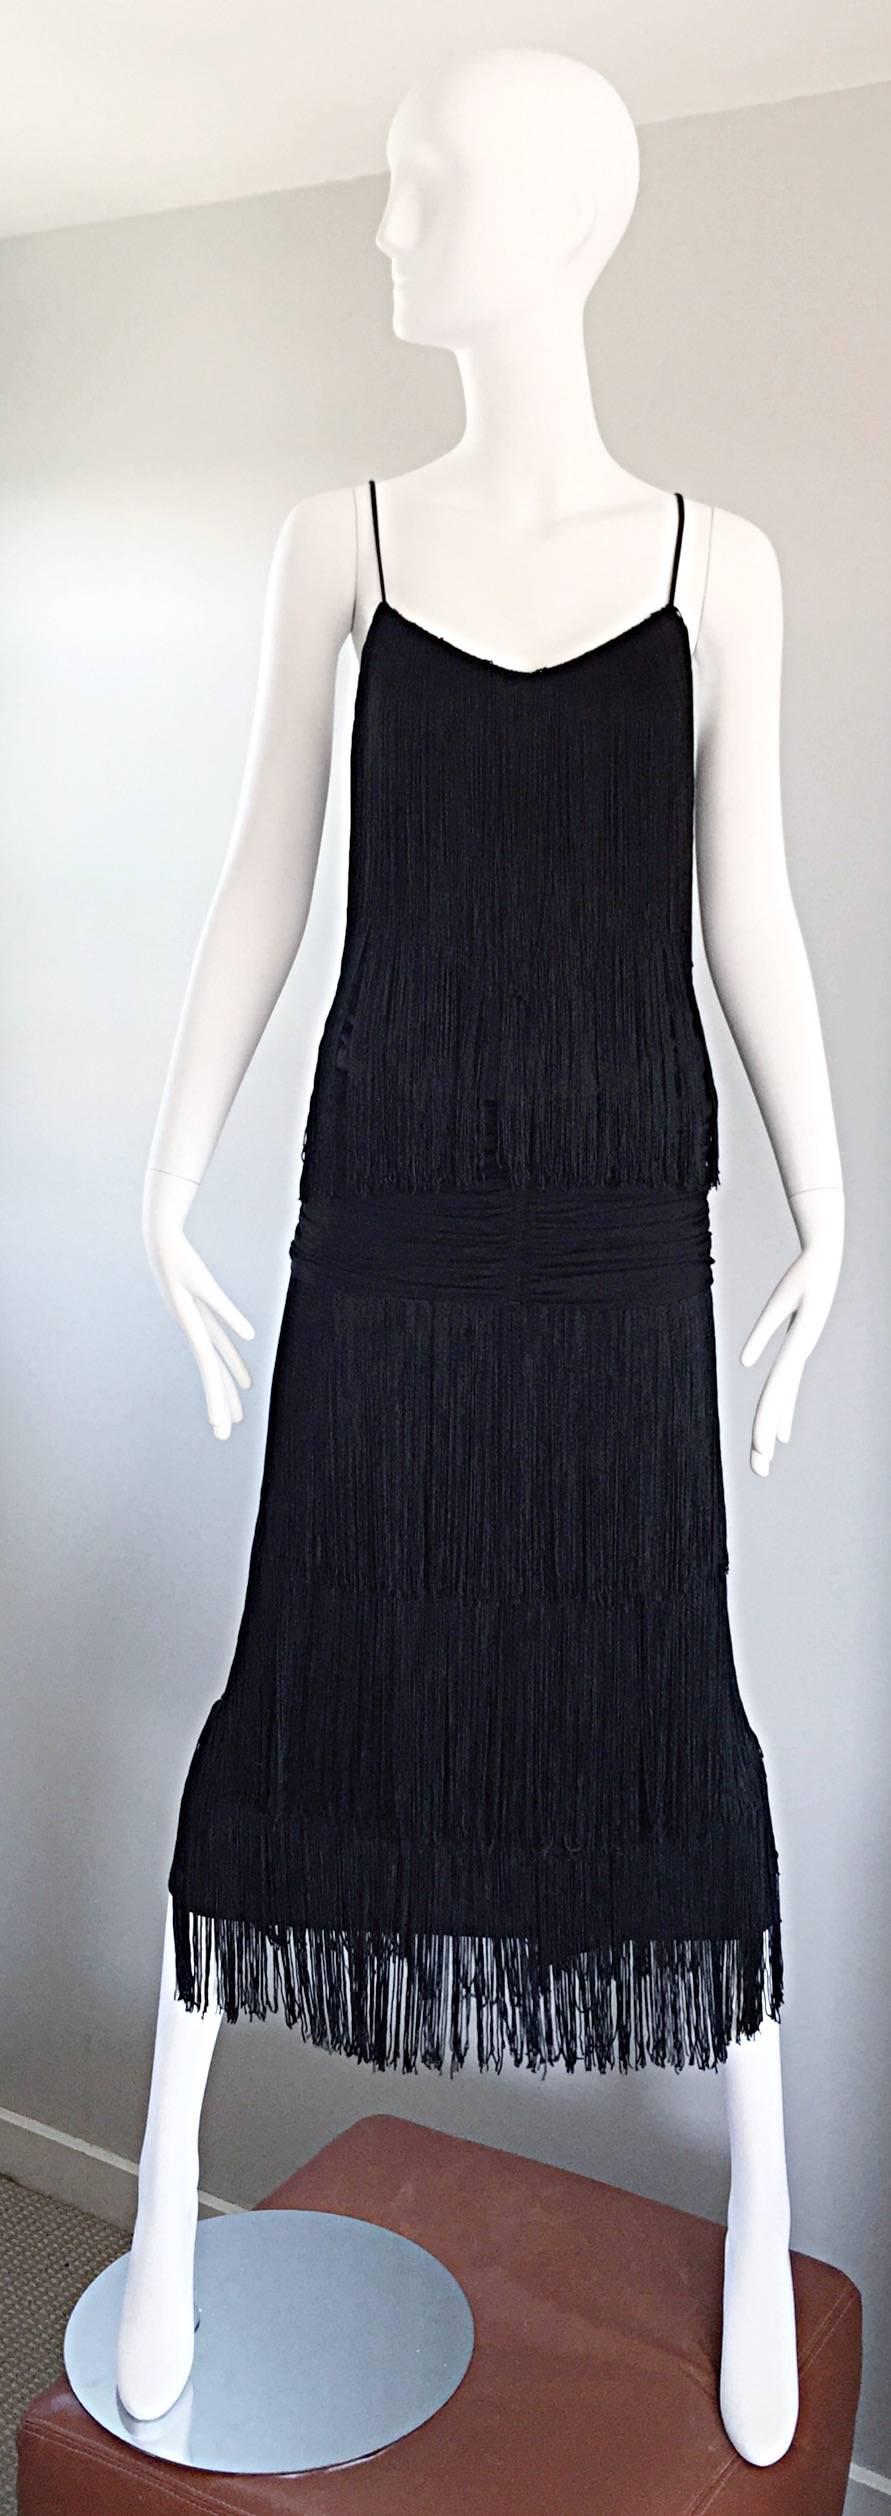 Amazing vintage PAT RICHARDS for I. MAGNIN fully fringed black jersey dress! 1970s does 1920s with this flapper style dress! Features layers of hand-sewn silk fringe throughout the entire dress, with a chic rayon jersey exposed ruched drop waist.